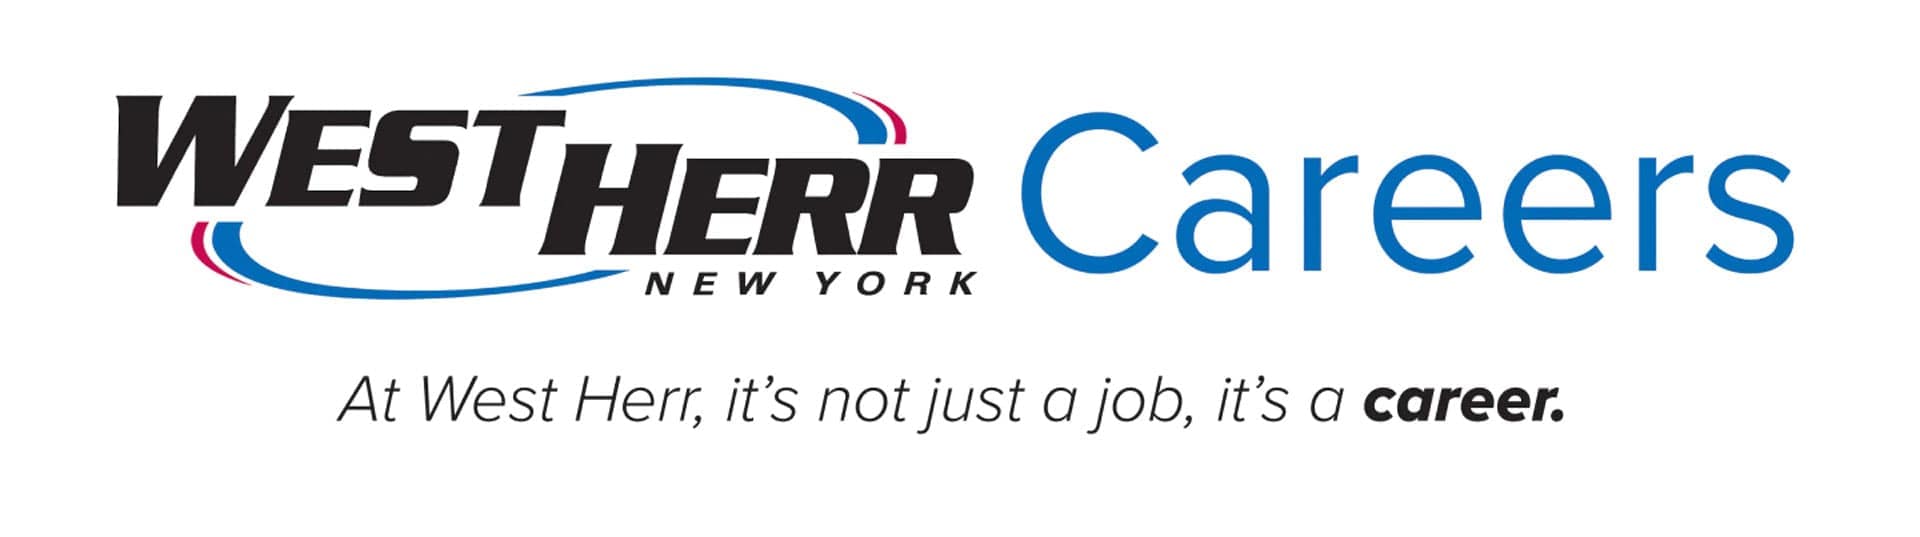 West Herr Cares. At West Herr, it's not just a job, it's a career.